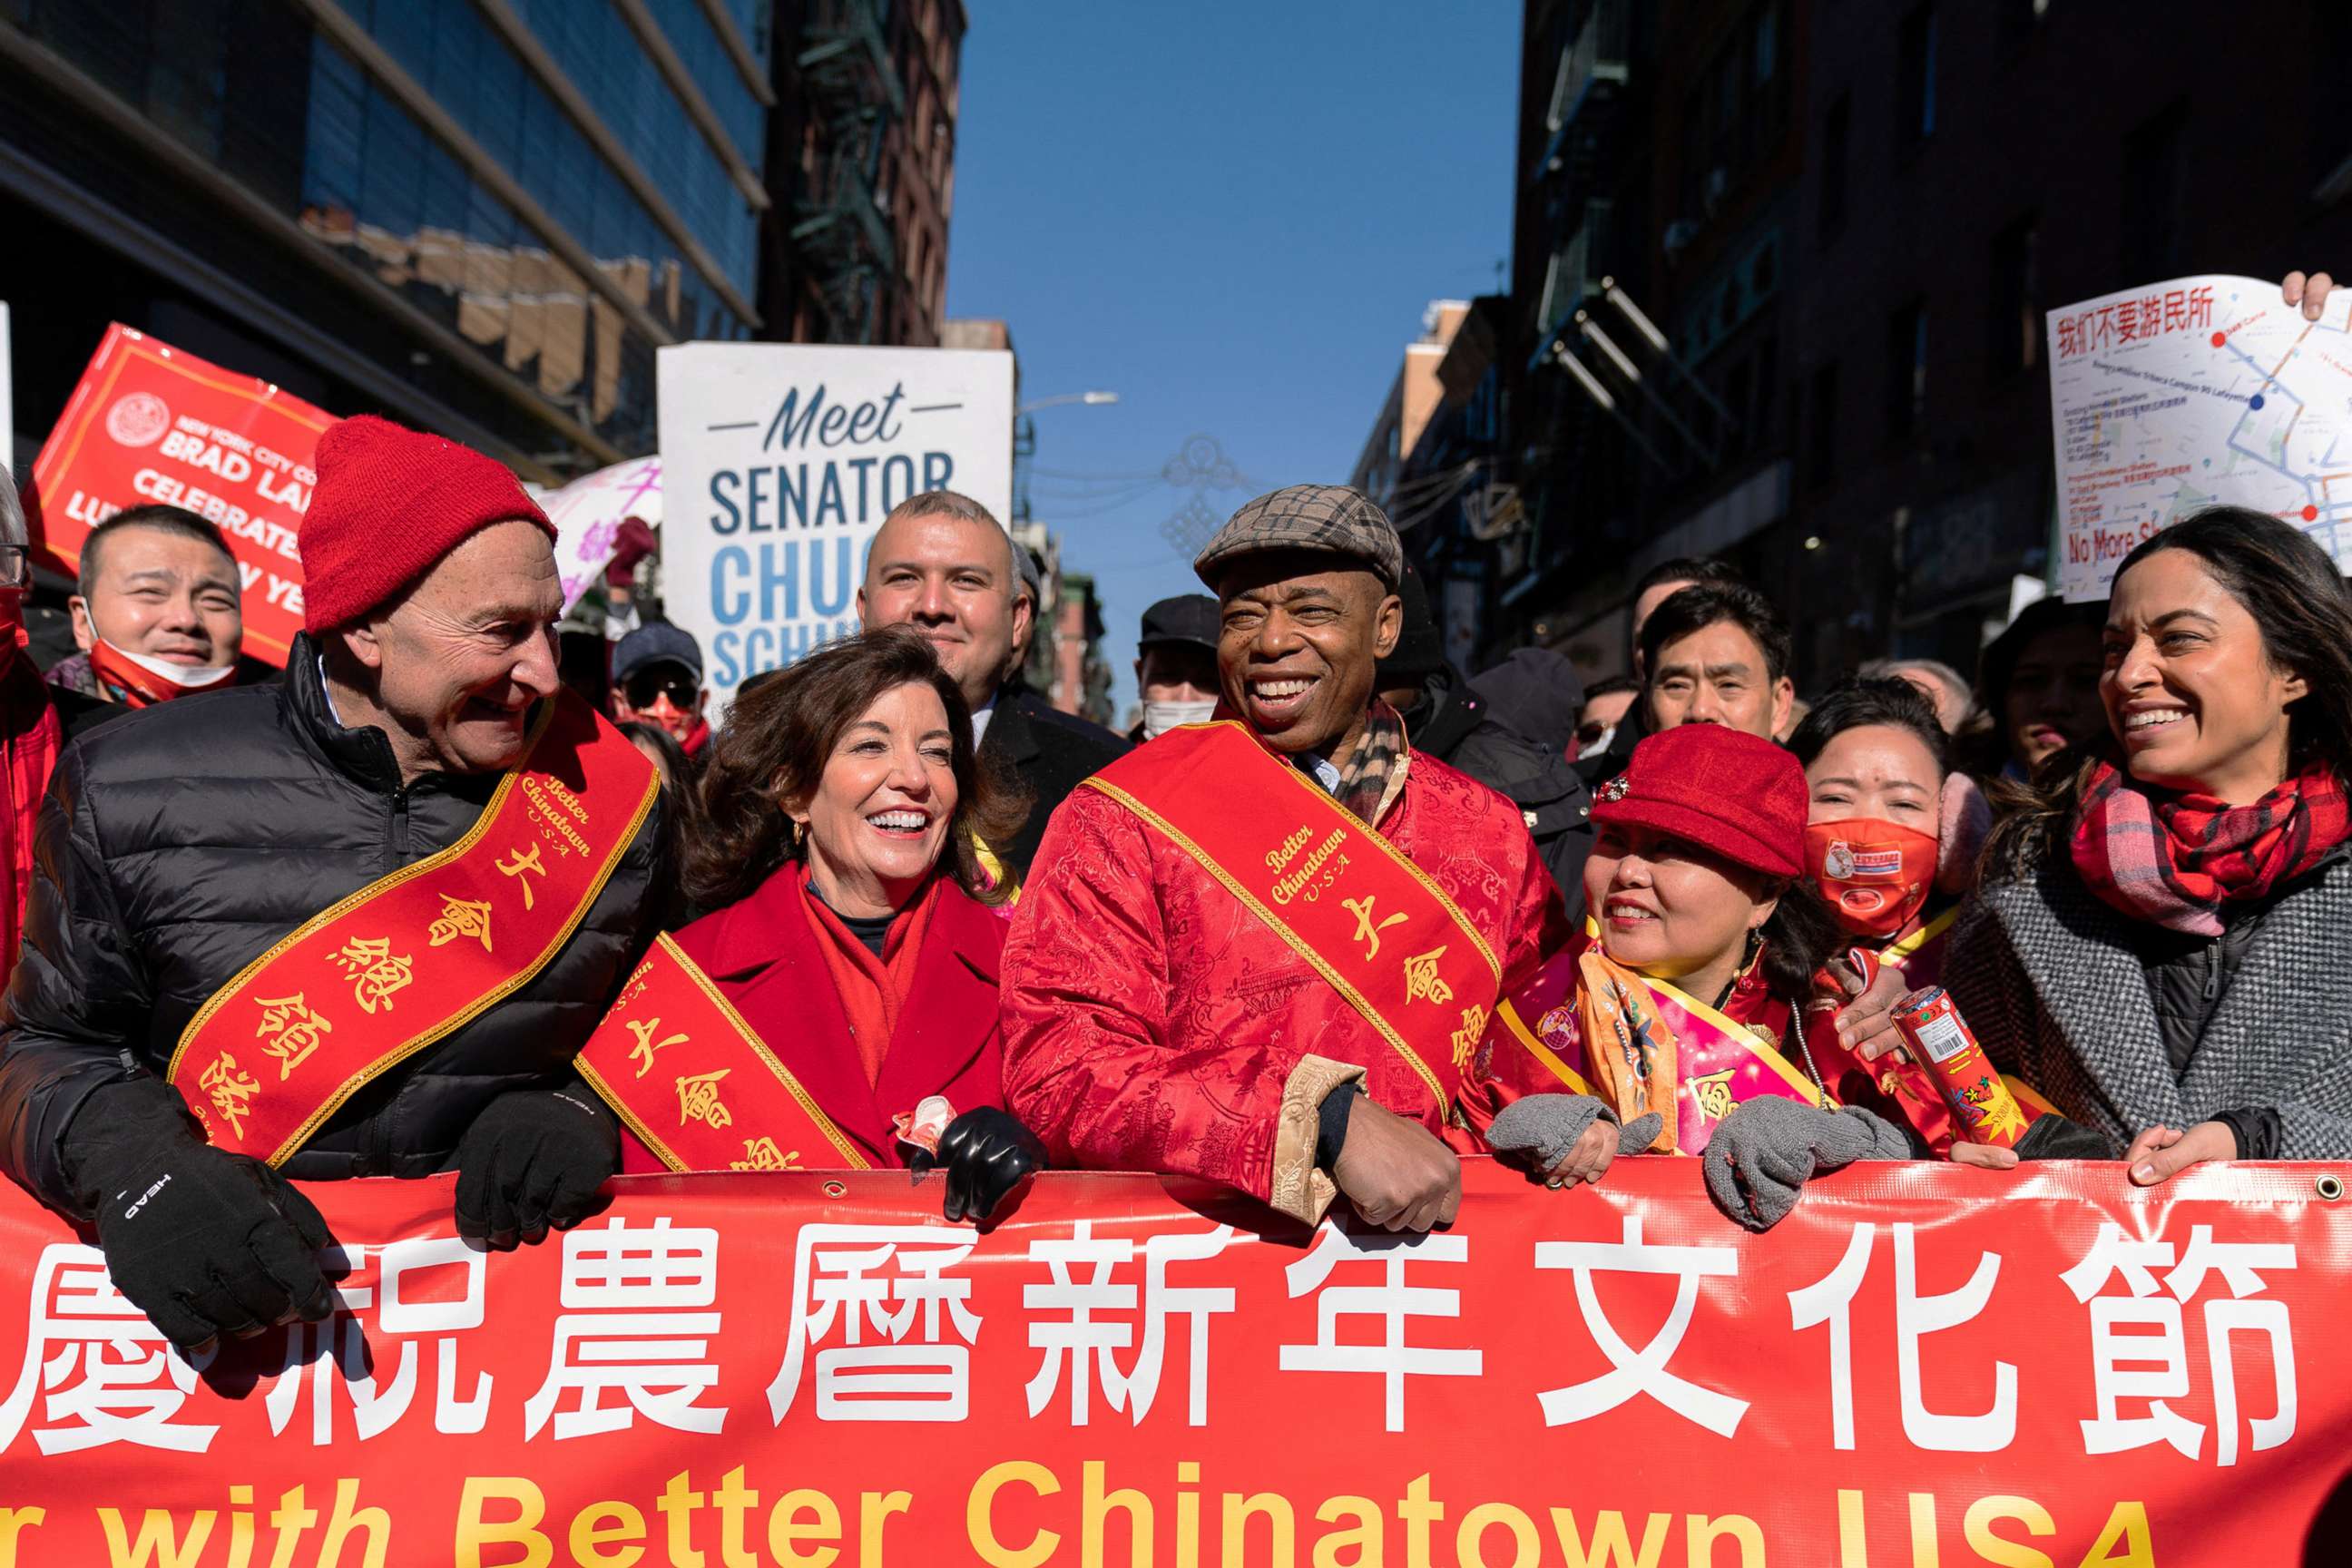 PHOTO: U.S. Senate Majority Leader Chuck Schumer, Governor of New York Kathy Hochul, and New York City Mayor Eric Adams attend the Lunar New Year Parade in Chinatown in New York, Feb. 20, 2022. 